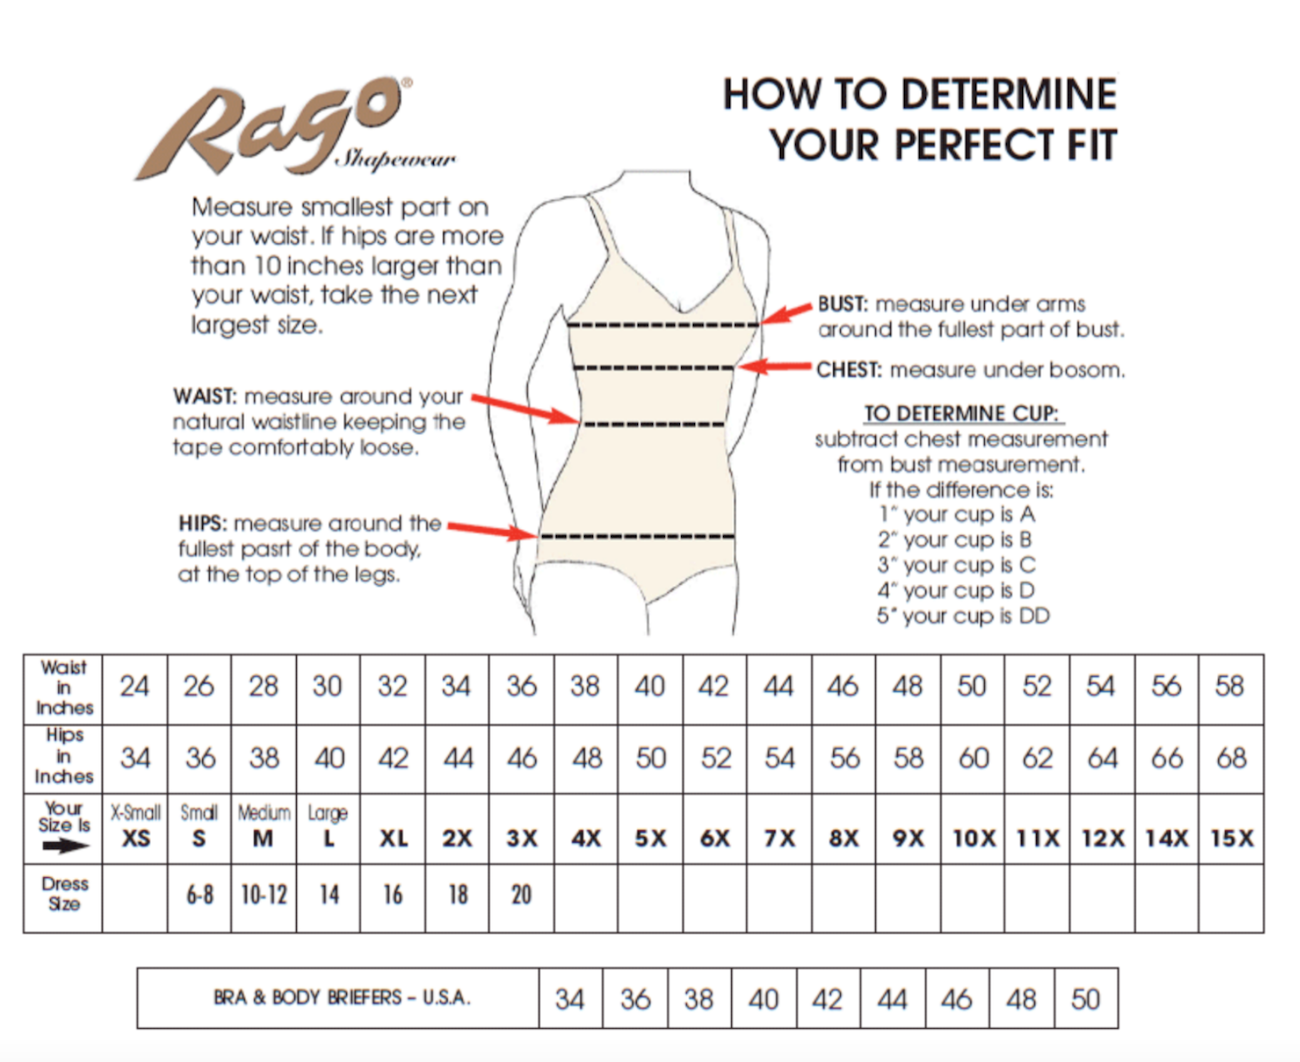 The Rago Shapewear﻿ style 1294 #girdle is now being made in red and black!